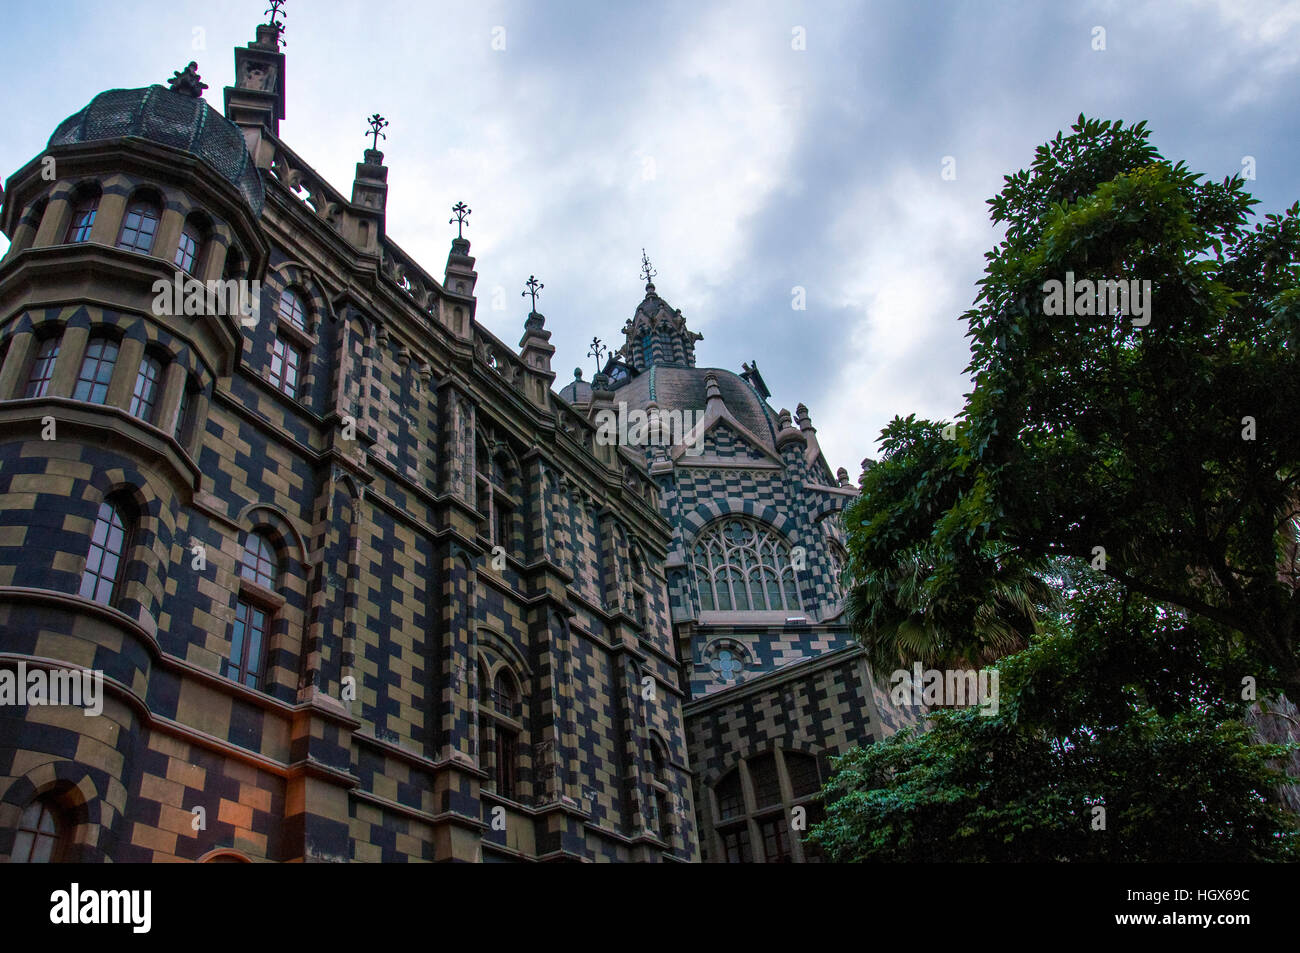 The Rafael Uribe Uribe Palace of Culture in medellin, Colombia Stock Photo